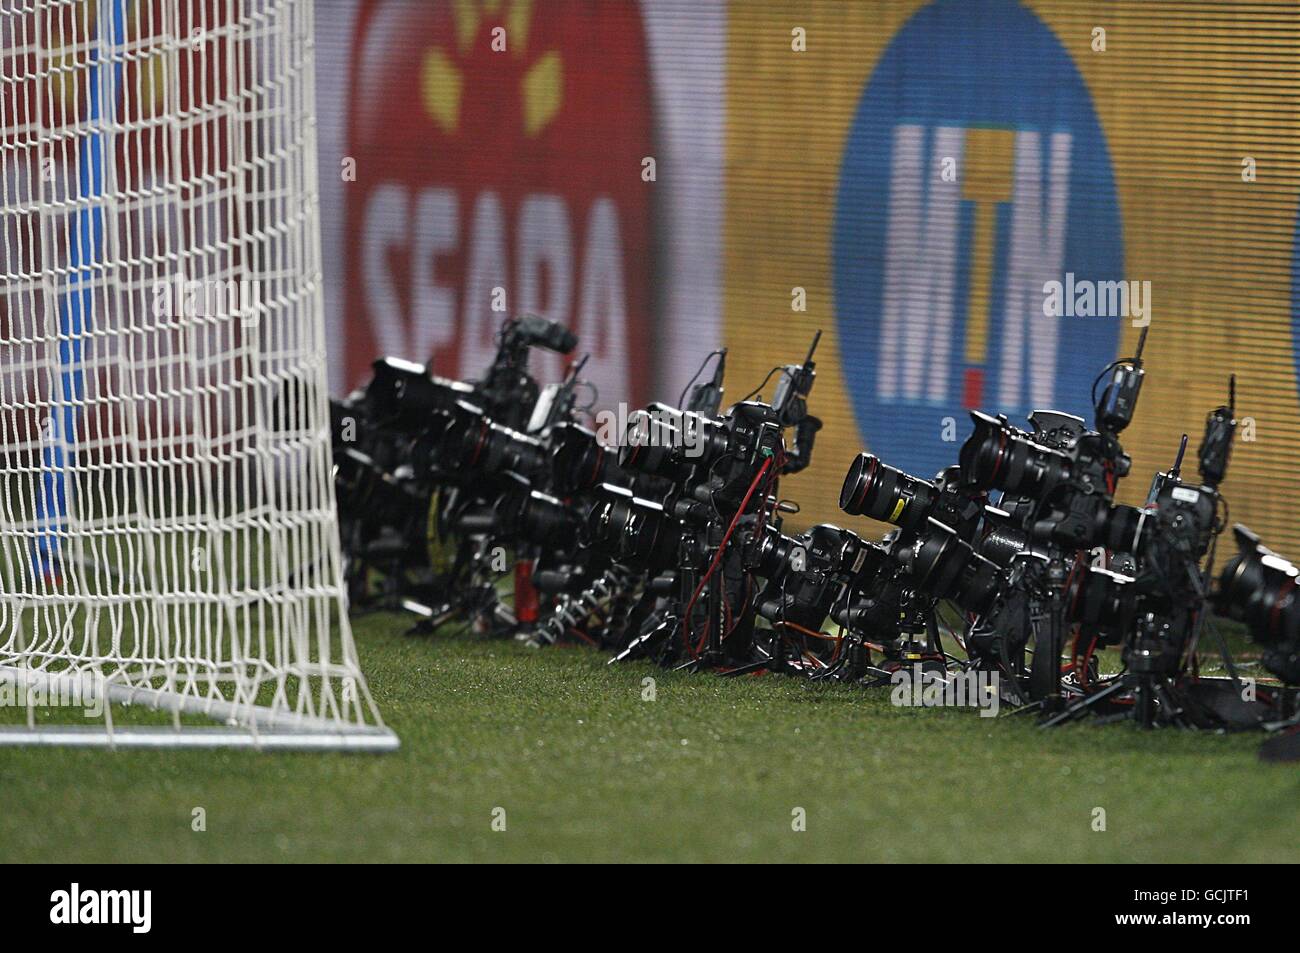 Soccer - 2010 FIFA World Cup South Africa - Round Of 16 - Brazil v Chile - Ellis Park. A group of romote cameras pointed at the goal. Stock Photo